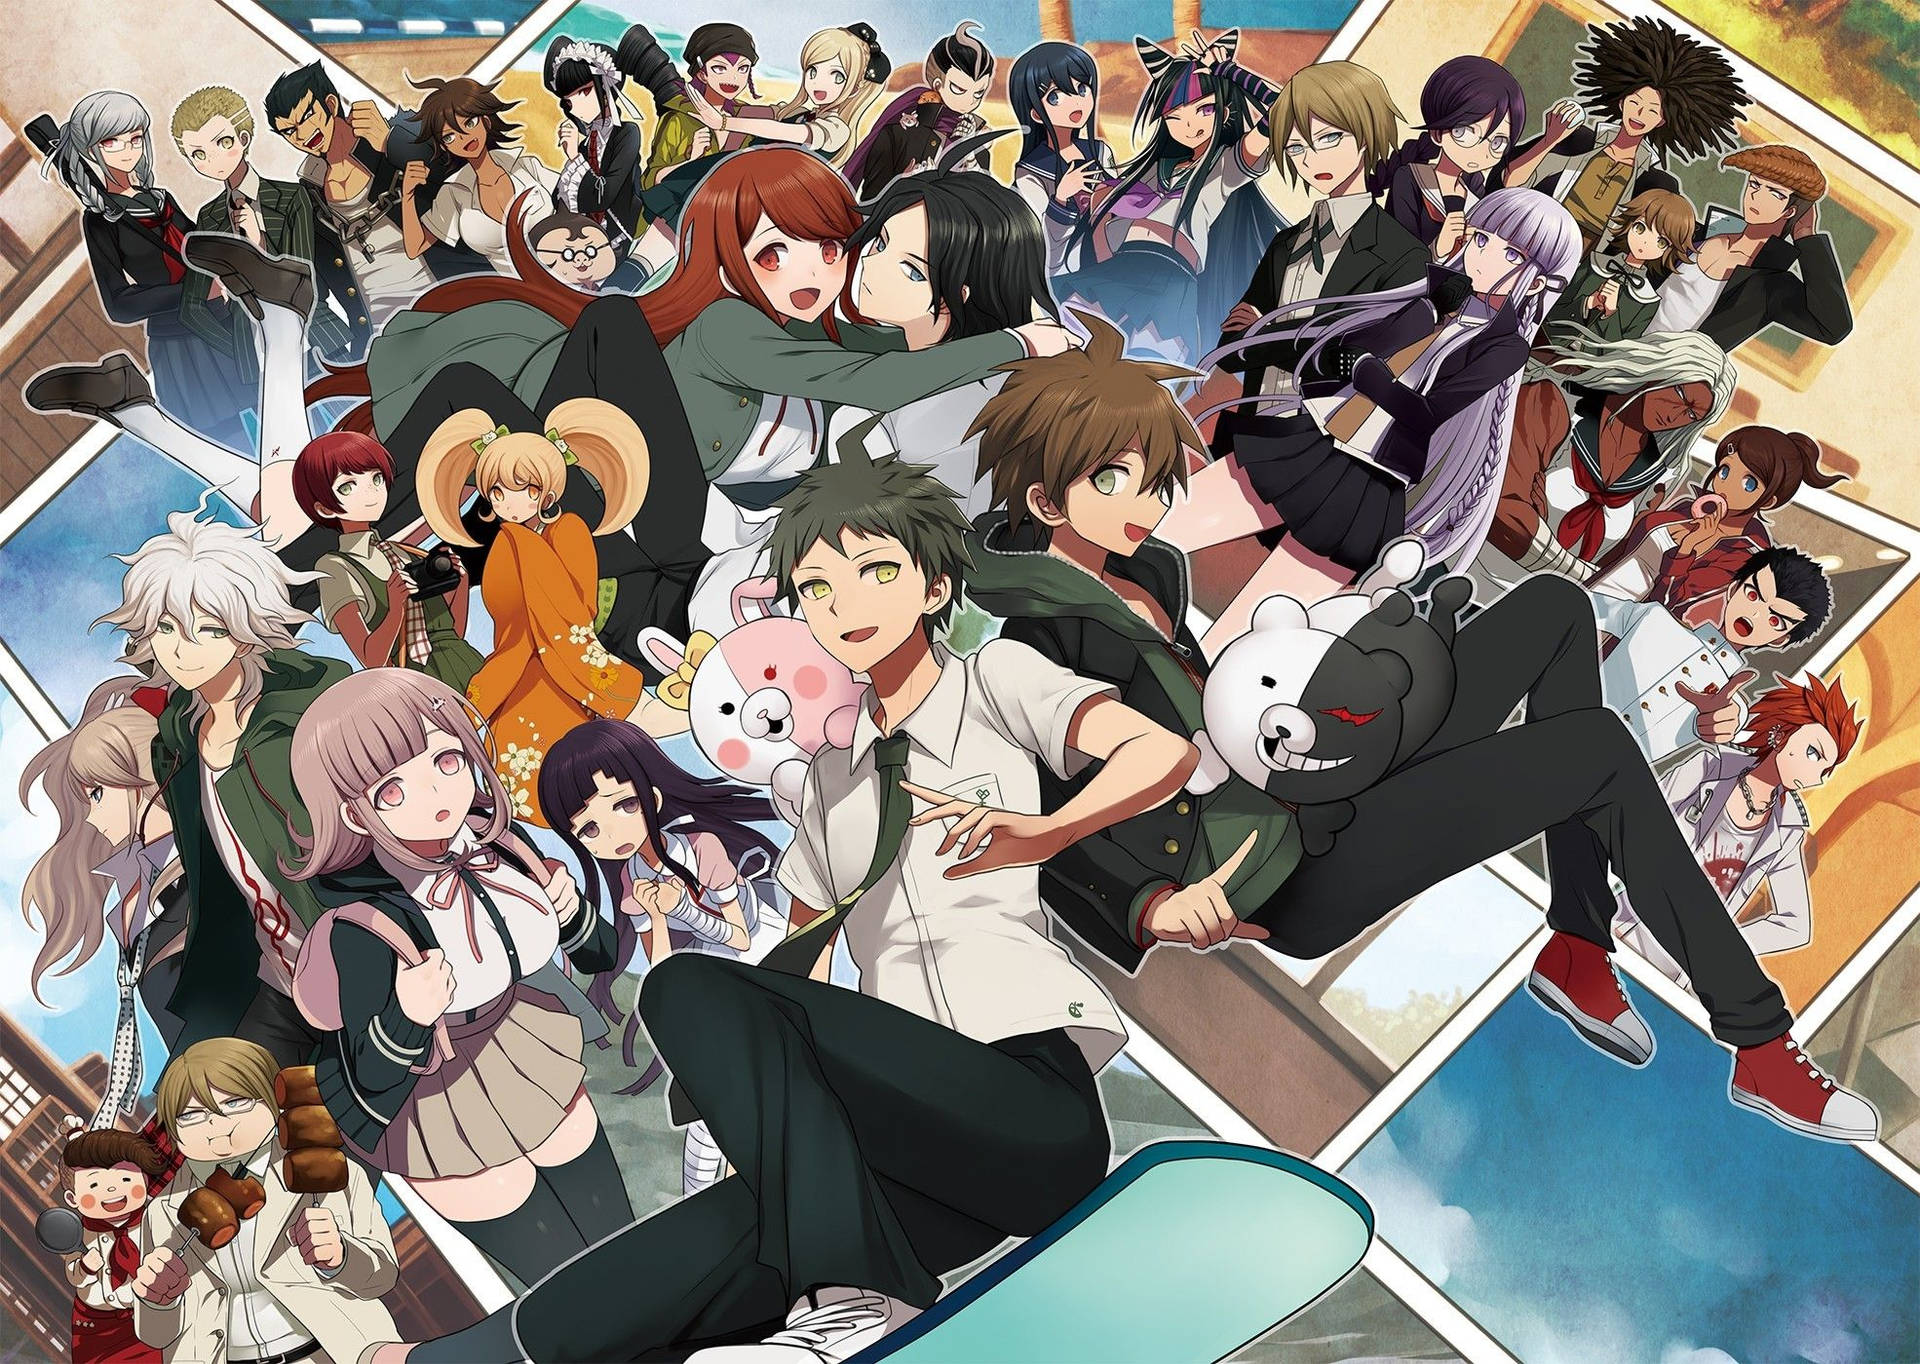 The students of Hope's Peak Academy show their heroic potential in Danganronpa: Trigger Happy Havoc Wallpaper